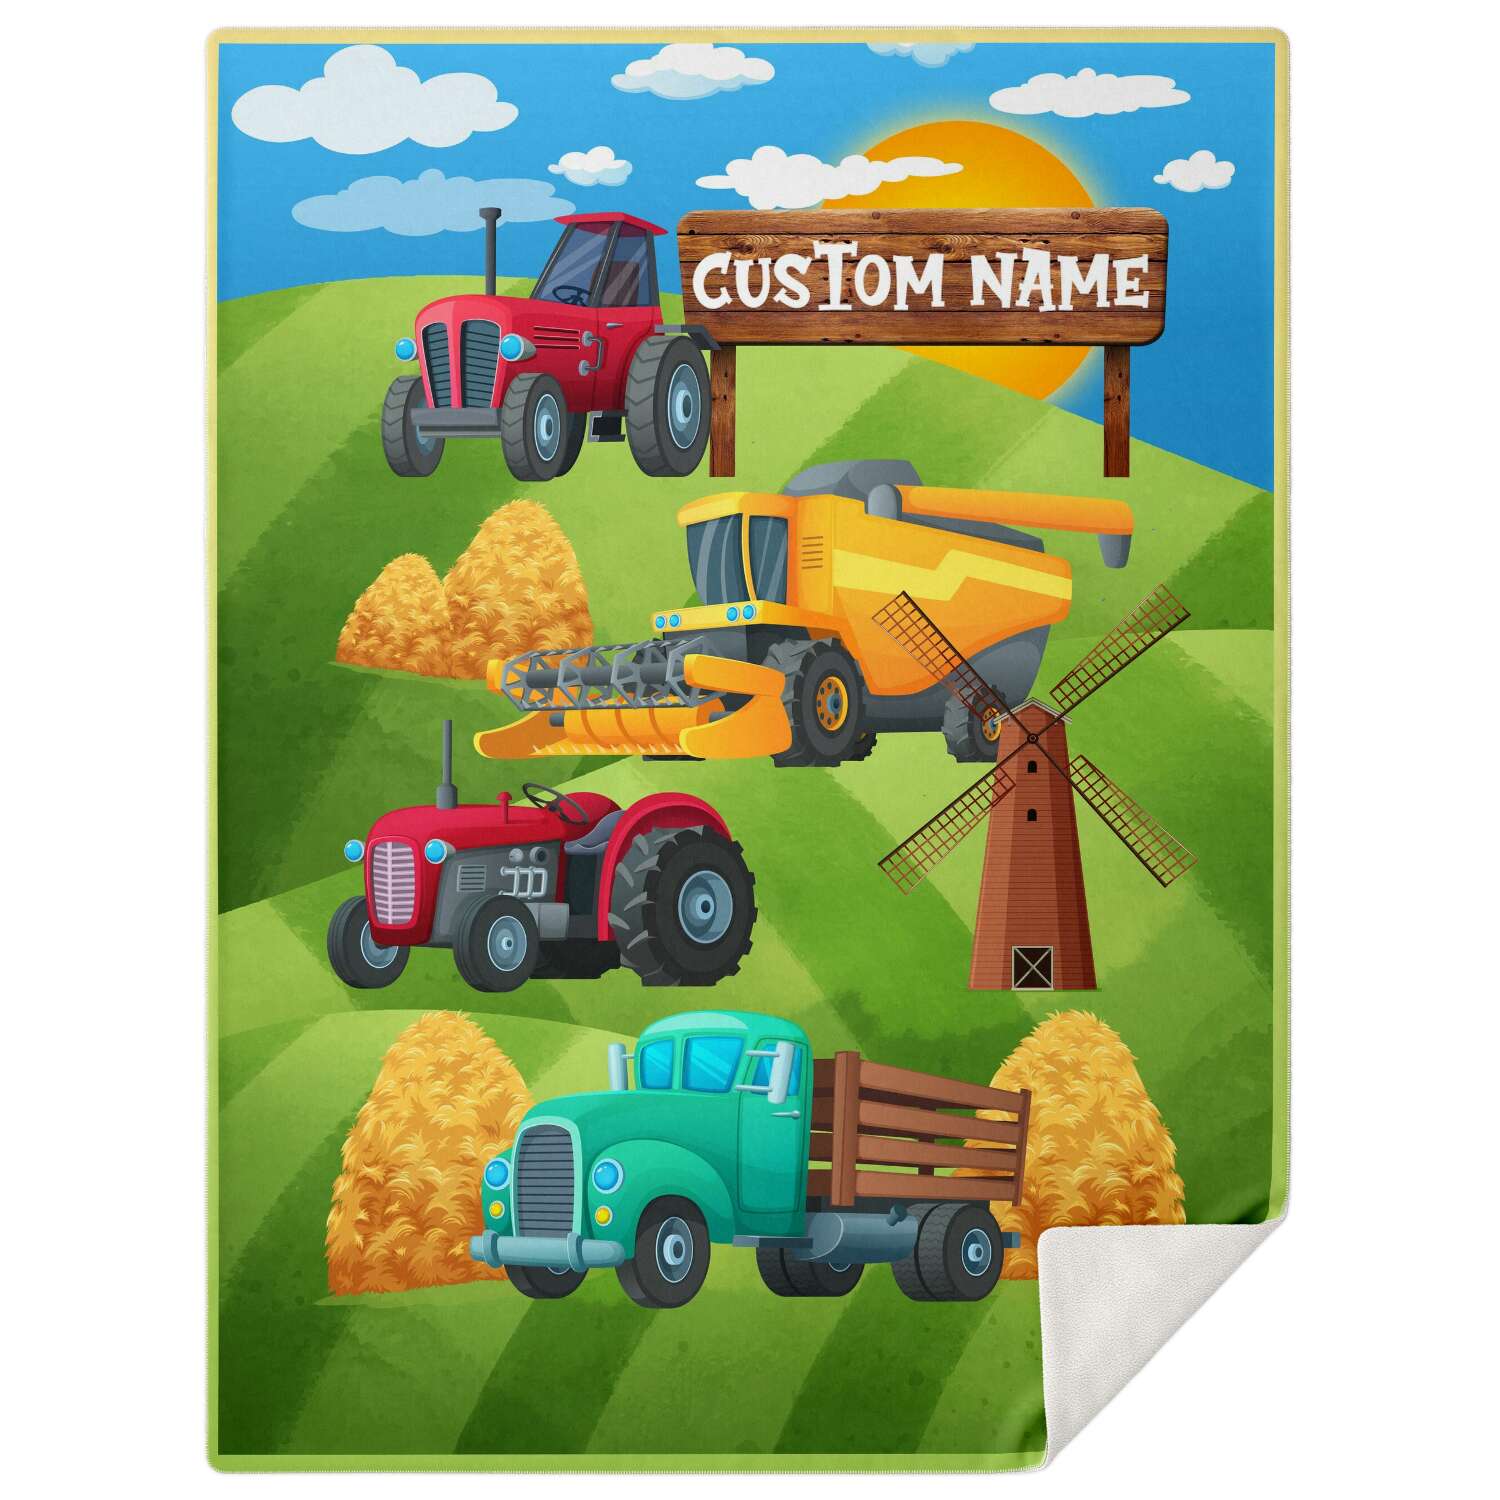 Personalized Name Farm Machinery Tractor Blanket for Kids, Custom Name Blanket for Boys & Girls